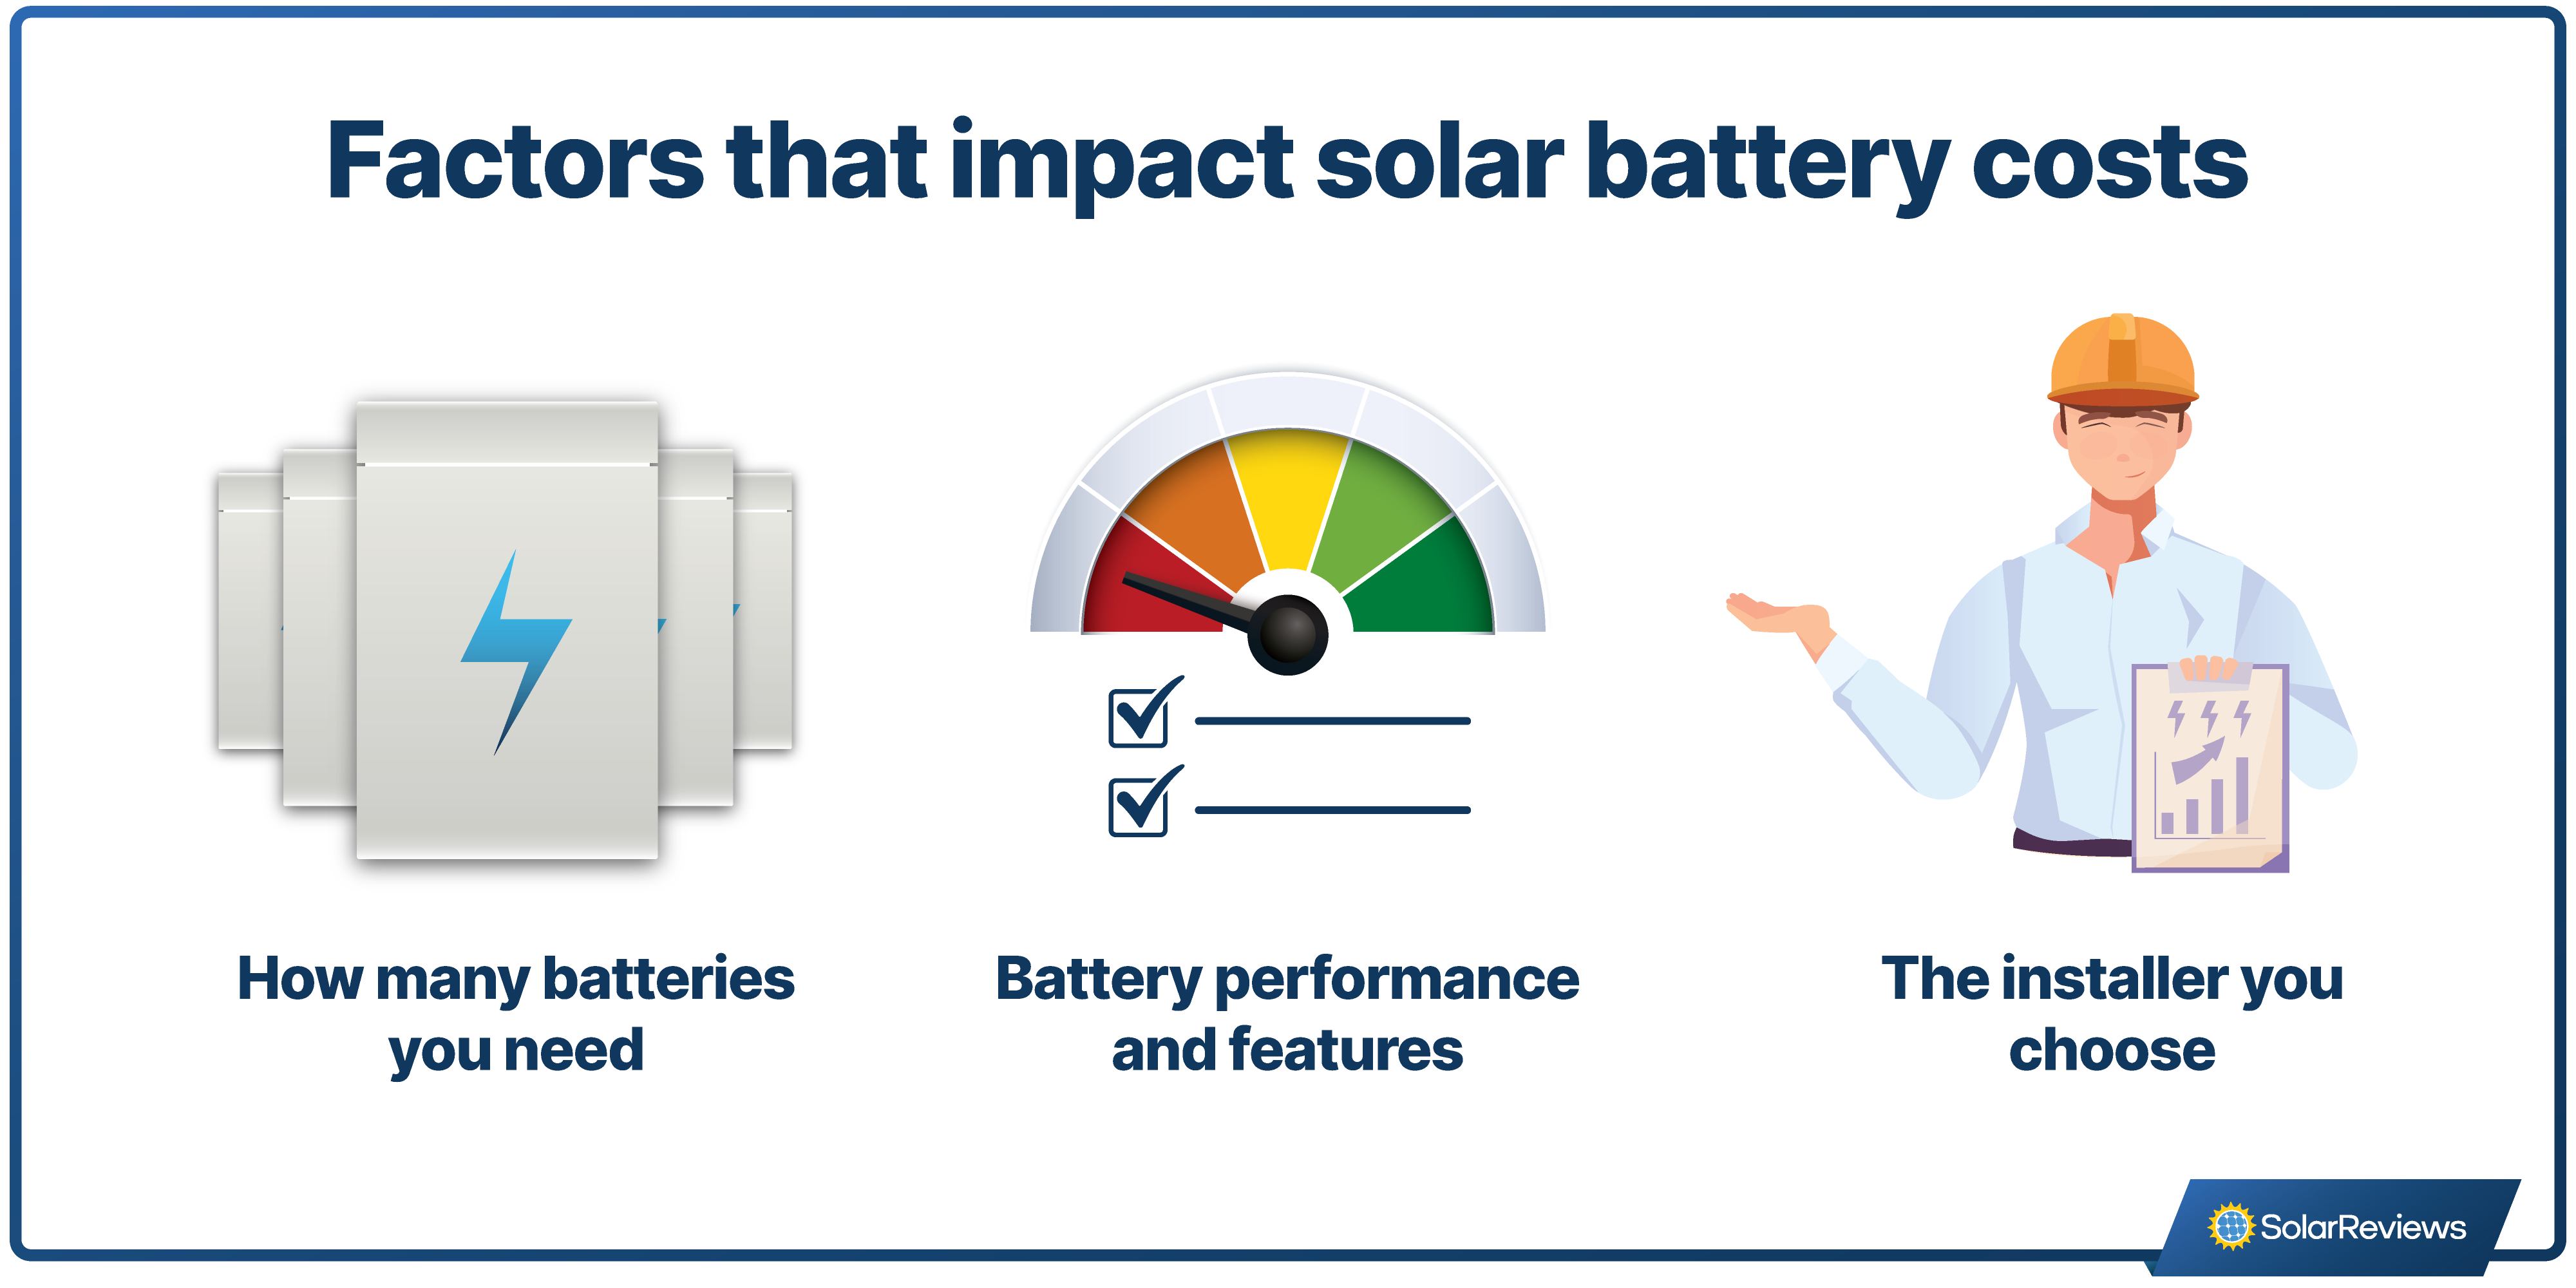 Graphic display three factors that impact solar battery costs, including how many batteries you need, the battery's performance and features, and the installer you choose. 